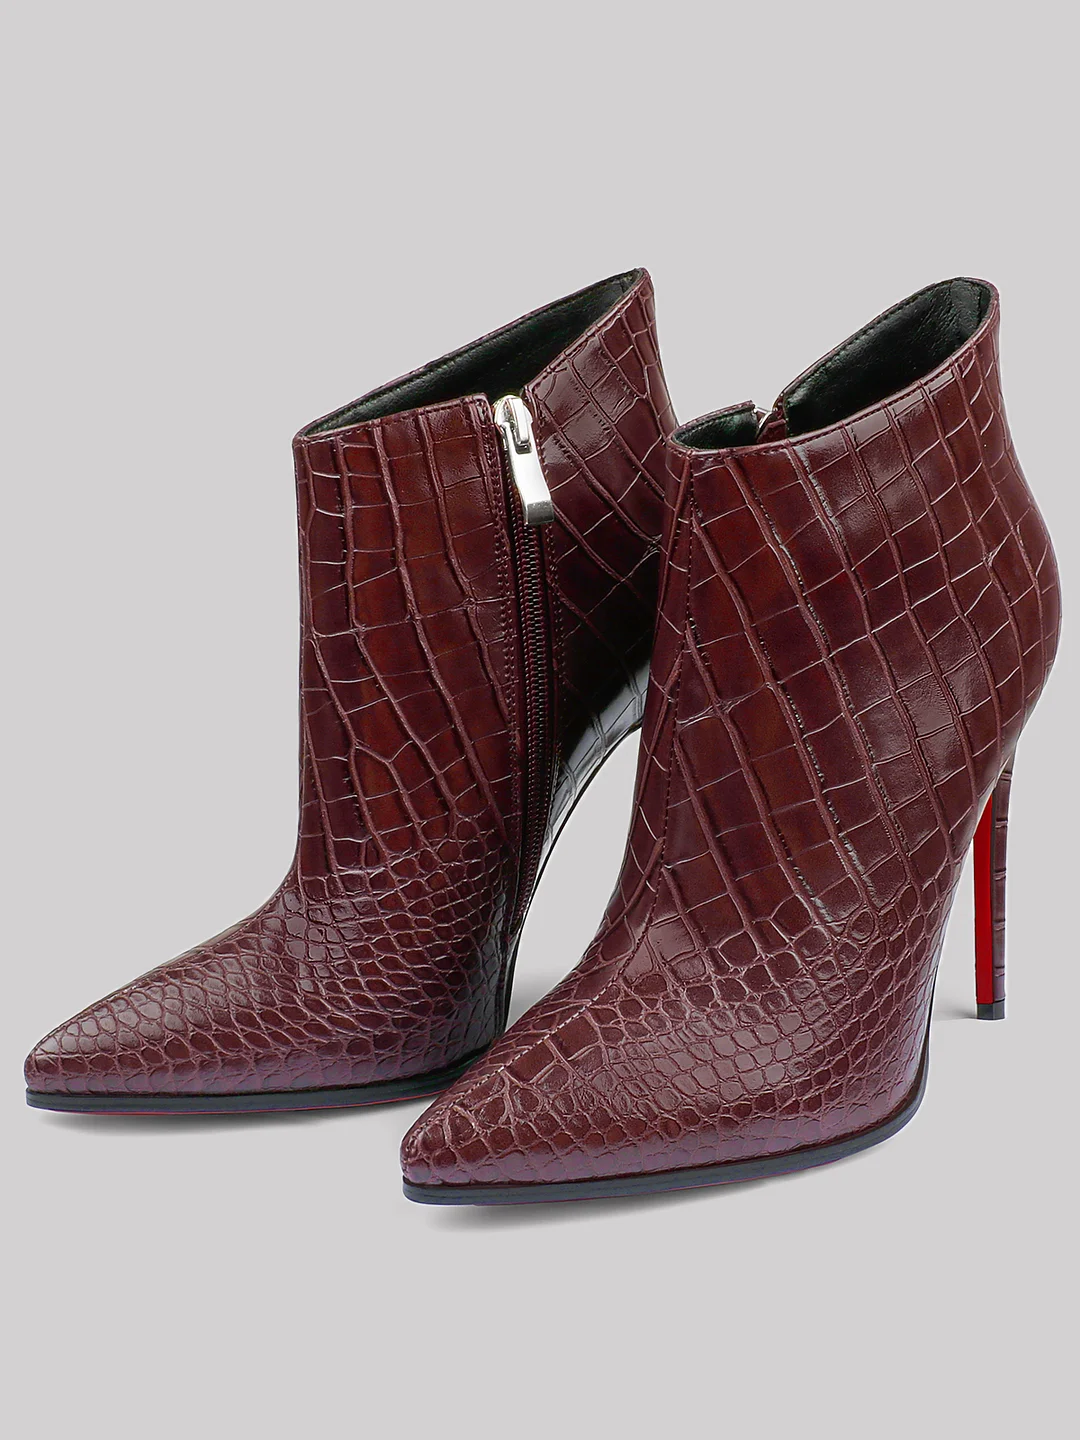 4.72" Women's Party Classic Stiletto Fashion Crocodile Print Ankle Boots Red Bottoms Heels